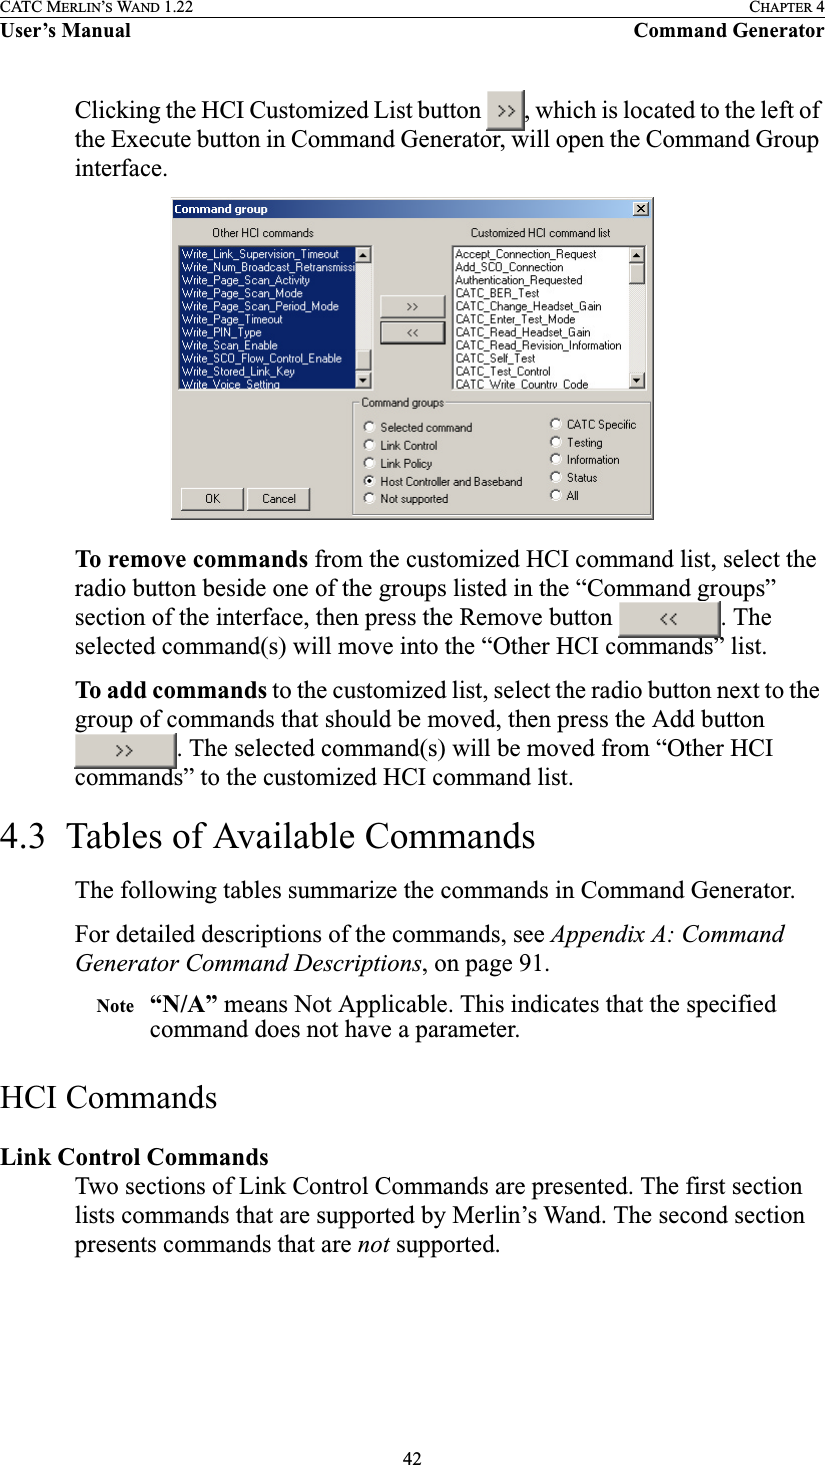 42CATC MERLIN’S WAND 1.22 CHAPTER 4User’s Manual Command GeneratorClicking the HCI Customized List button  , which is located to the left of the Execute button in Command Generator, will open the Command Group interface.To remove commands from the customized HCI command list, select the radio button beside one of the groups listed in the “Command groups” section of the interface, then press the Remove button  . The selected command(s) will move into the “Other HCI commands” list.To add commands to the customized list, select the radio button next to the group of commands that should be moved, then press the Add button . The selected command(s) will be moved from “Other HCI commands” to the customized HCI command list.4.3  Tables of Available CommandsThe following tables summarize the commands in Command Generator.For detailed descriptions of the commands, see Appendix A: Command Generator Command Descriptions, on page 91.Note “N/A” means Not Applicable. This indicates that the specified command does not have a parameter.HCI CommandsLink Control Commands Two sections of Link Control Commands are presented. The first section lists commands that are supported by Merlin’s Wand. The second section presents commands that are not supported.